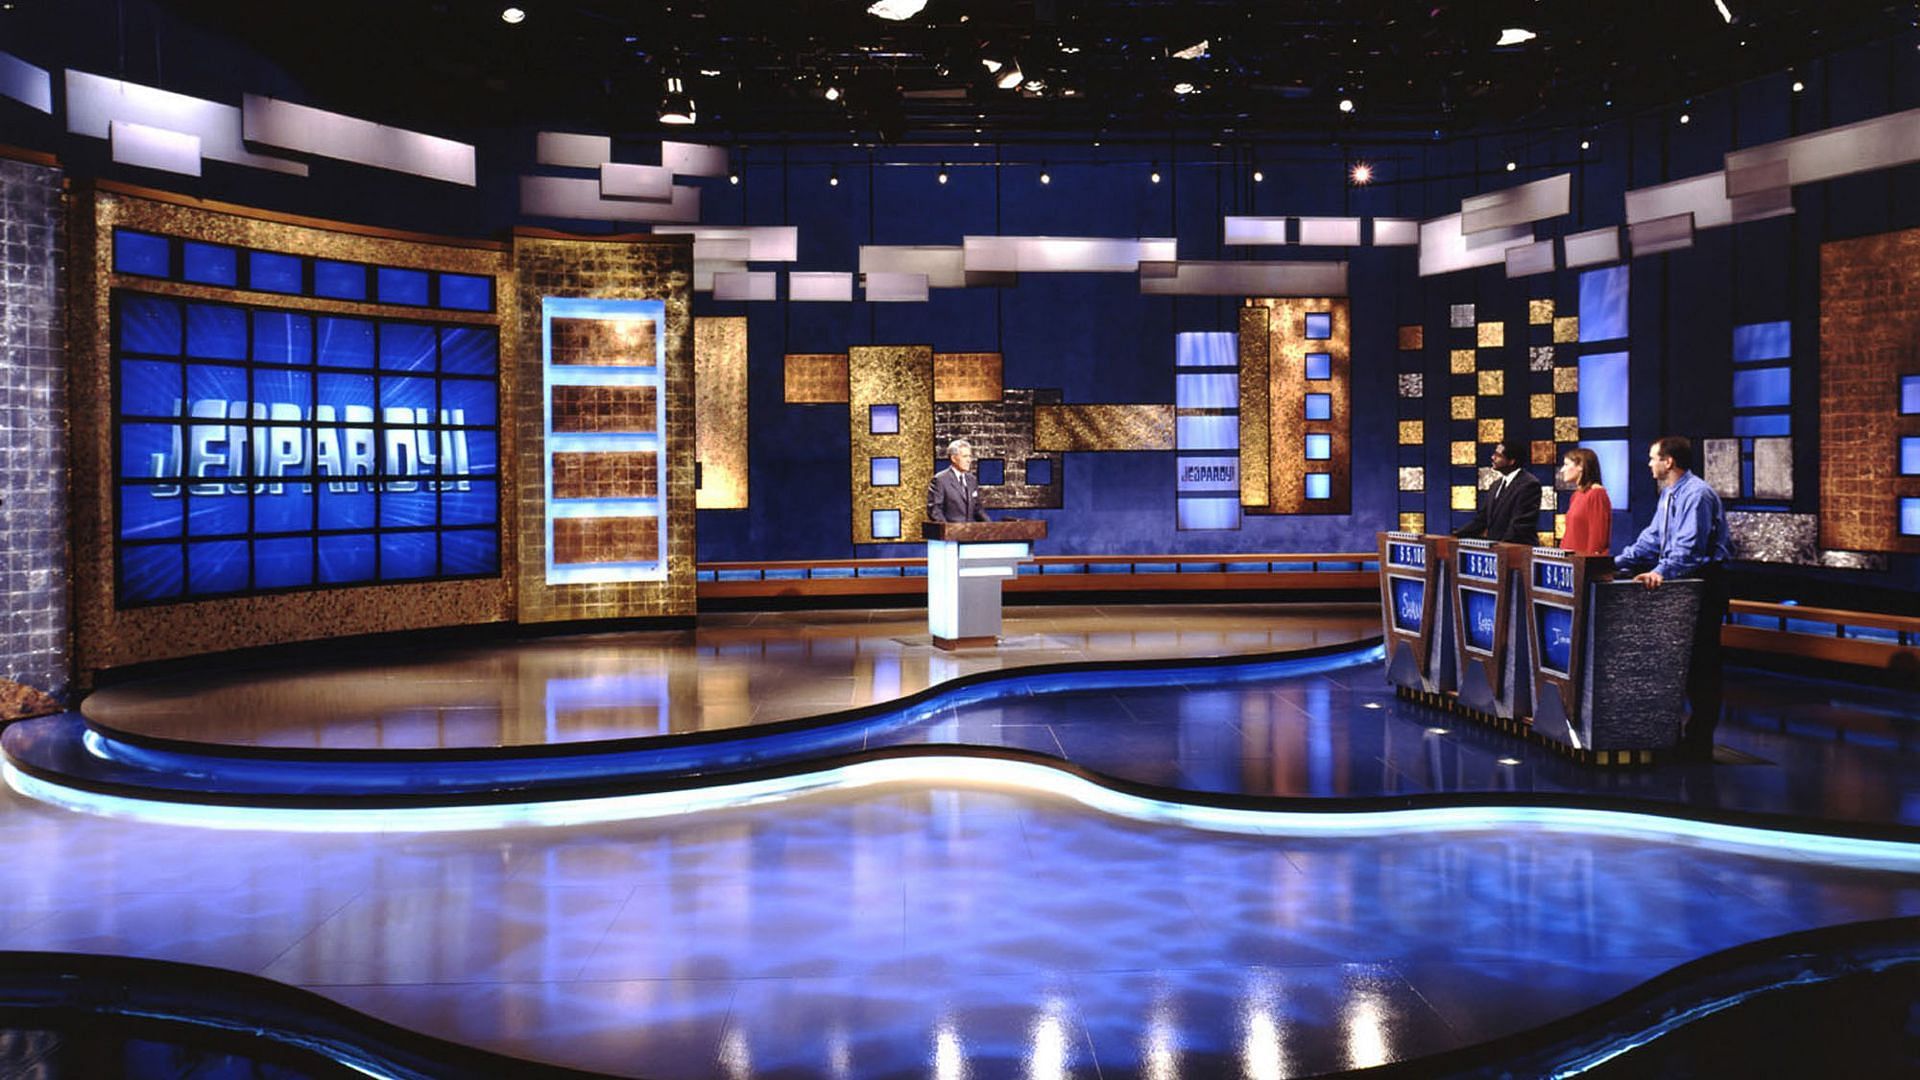 Today's Final Jeopardy! question, answer & contestants June 24, 2022